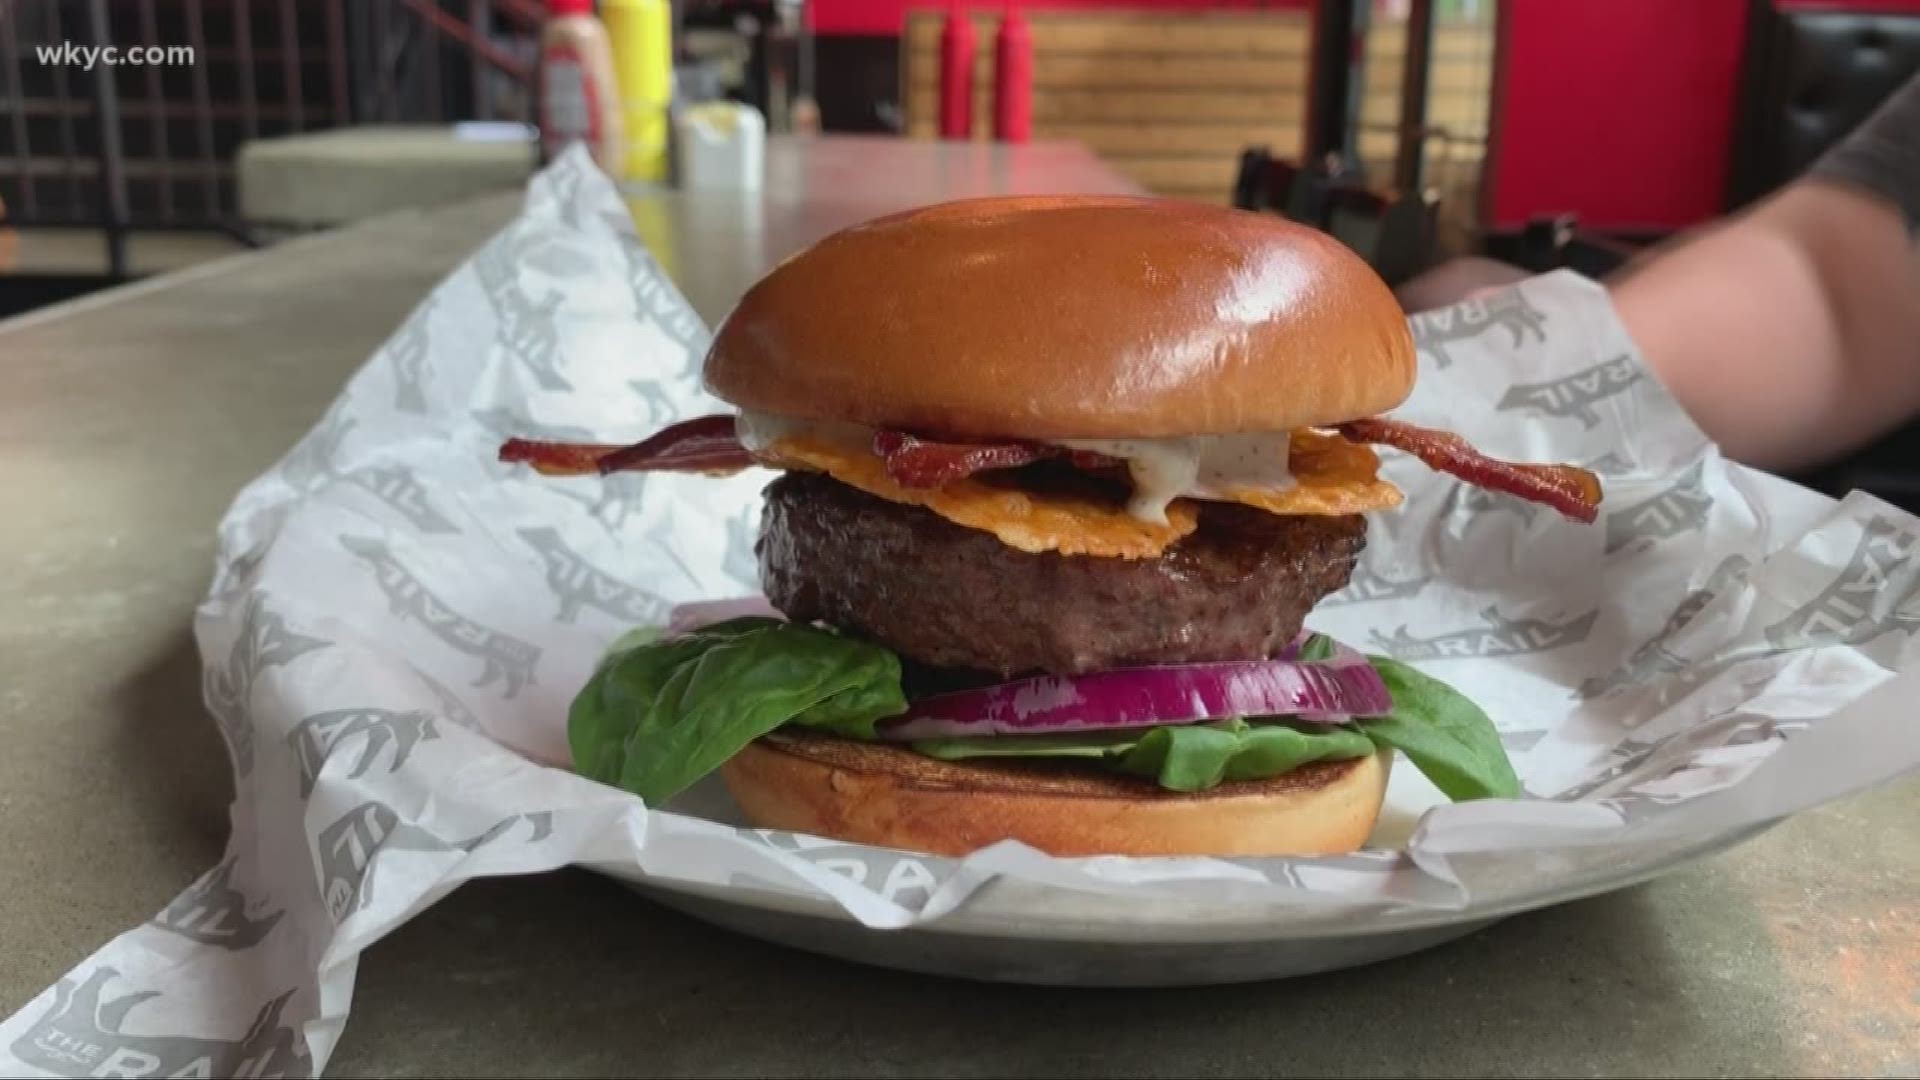 July 18, 2019: When it comes to burgers, nothing says Ohio pride more than a stop at The Rail. We sent Austin Love to their North Olmsted location for a taste test with a lesson in how they grill up their burgers.